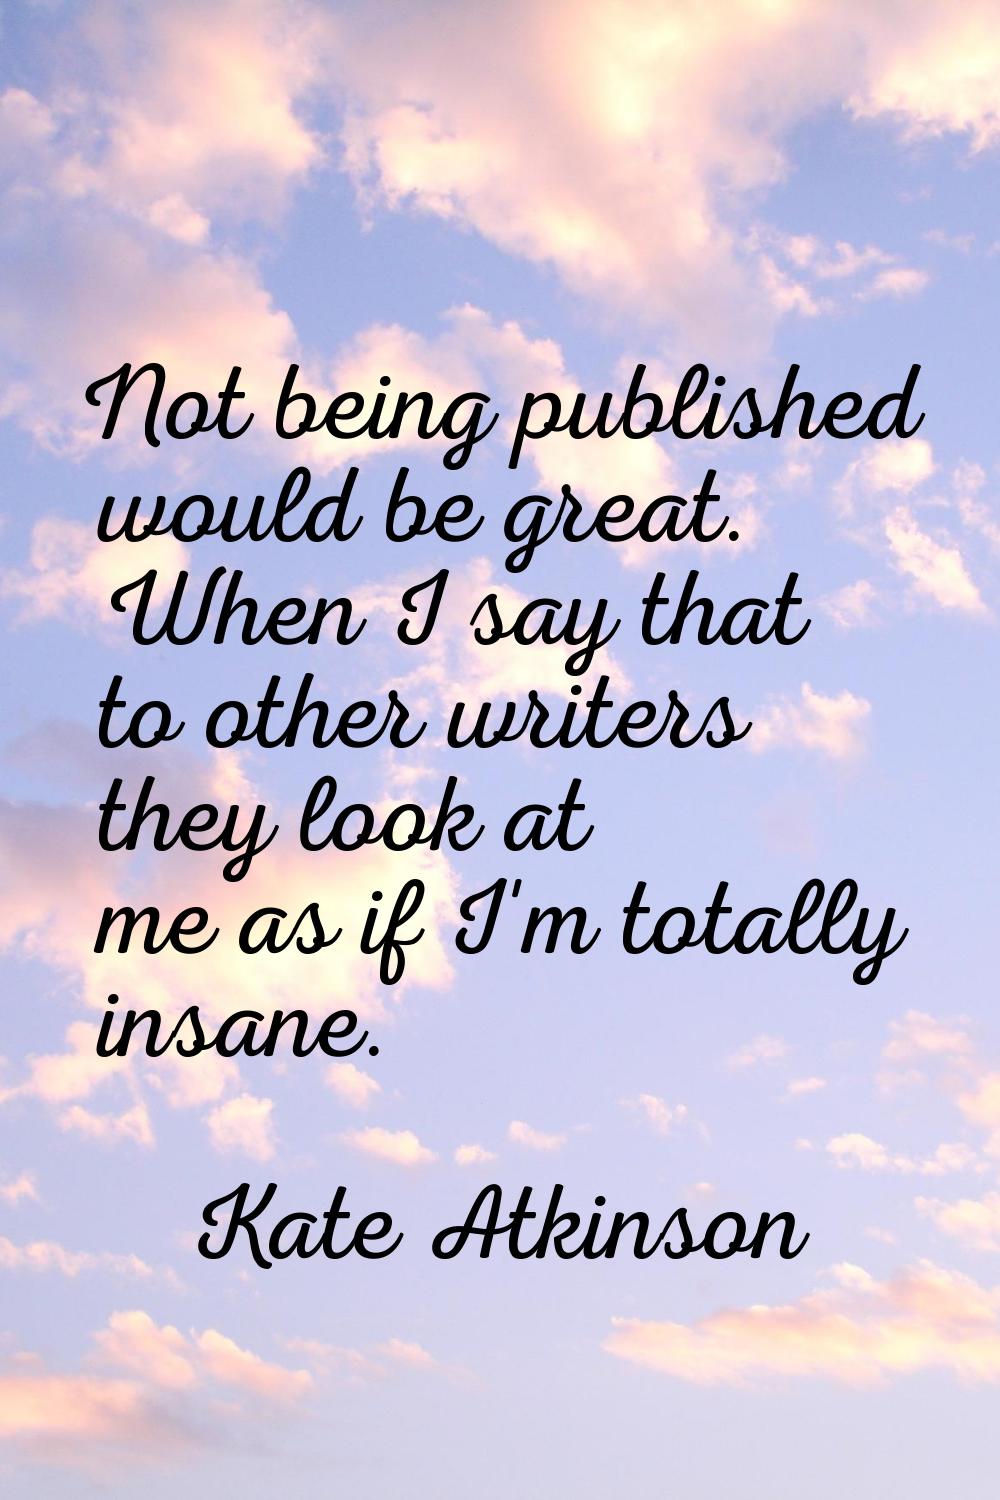 Not being published would be great. When I say that to other writers they look at me as if I'm tota